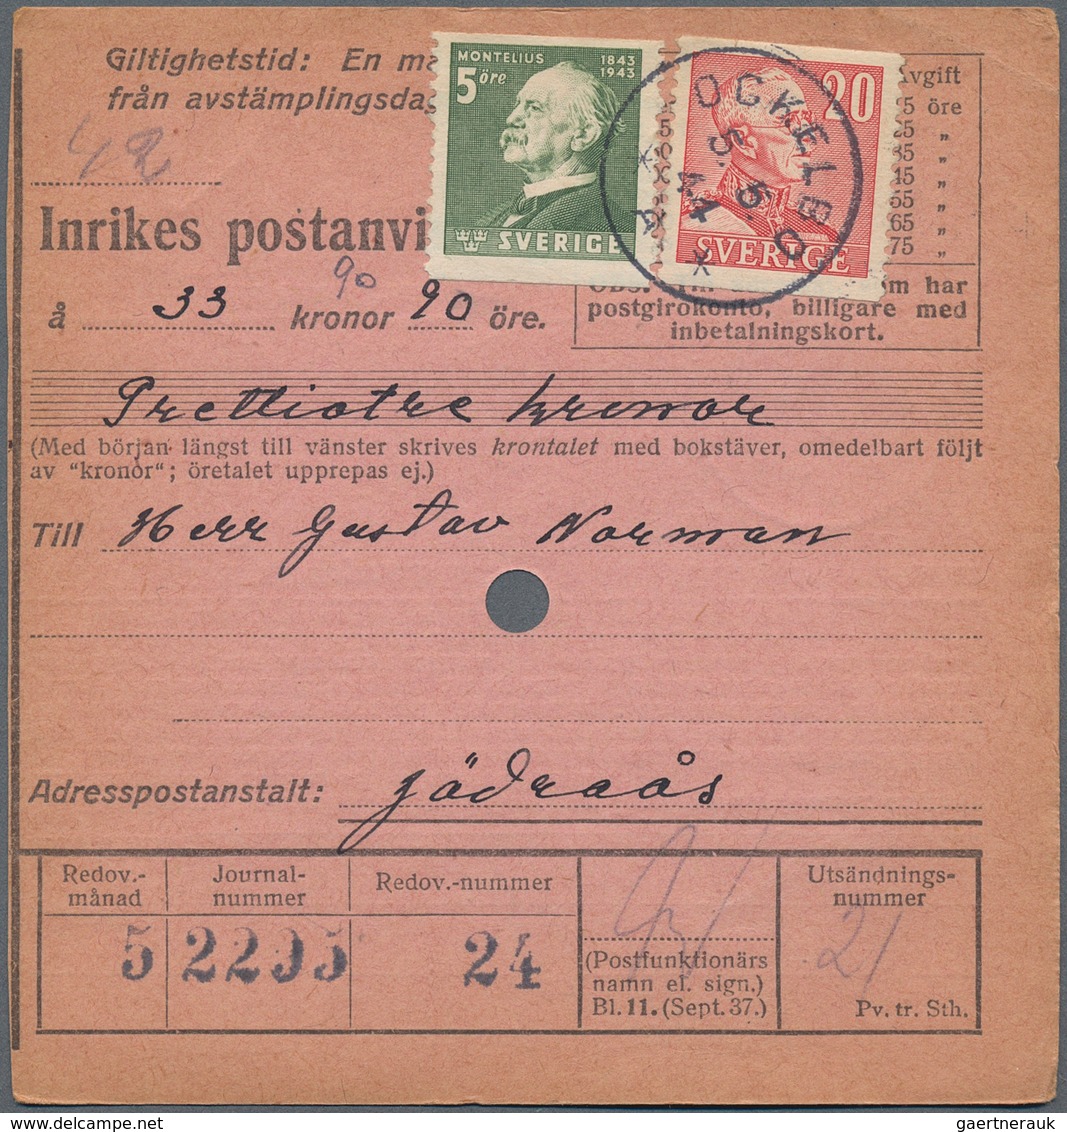 Schweden: 1944, holding of apprx. 600 money orders, showing various rates and attractive diversity o